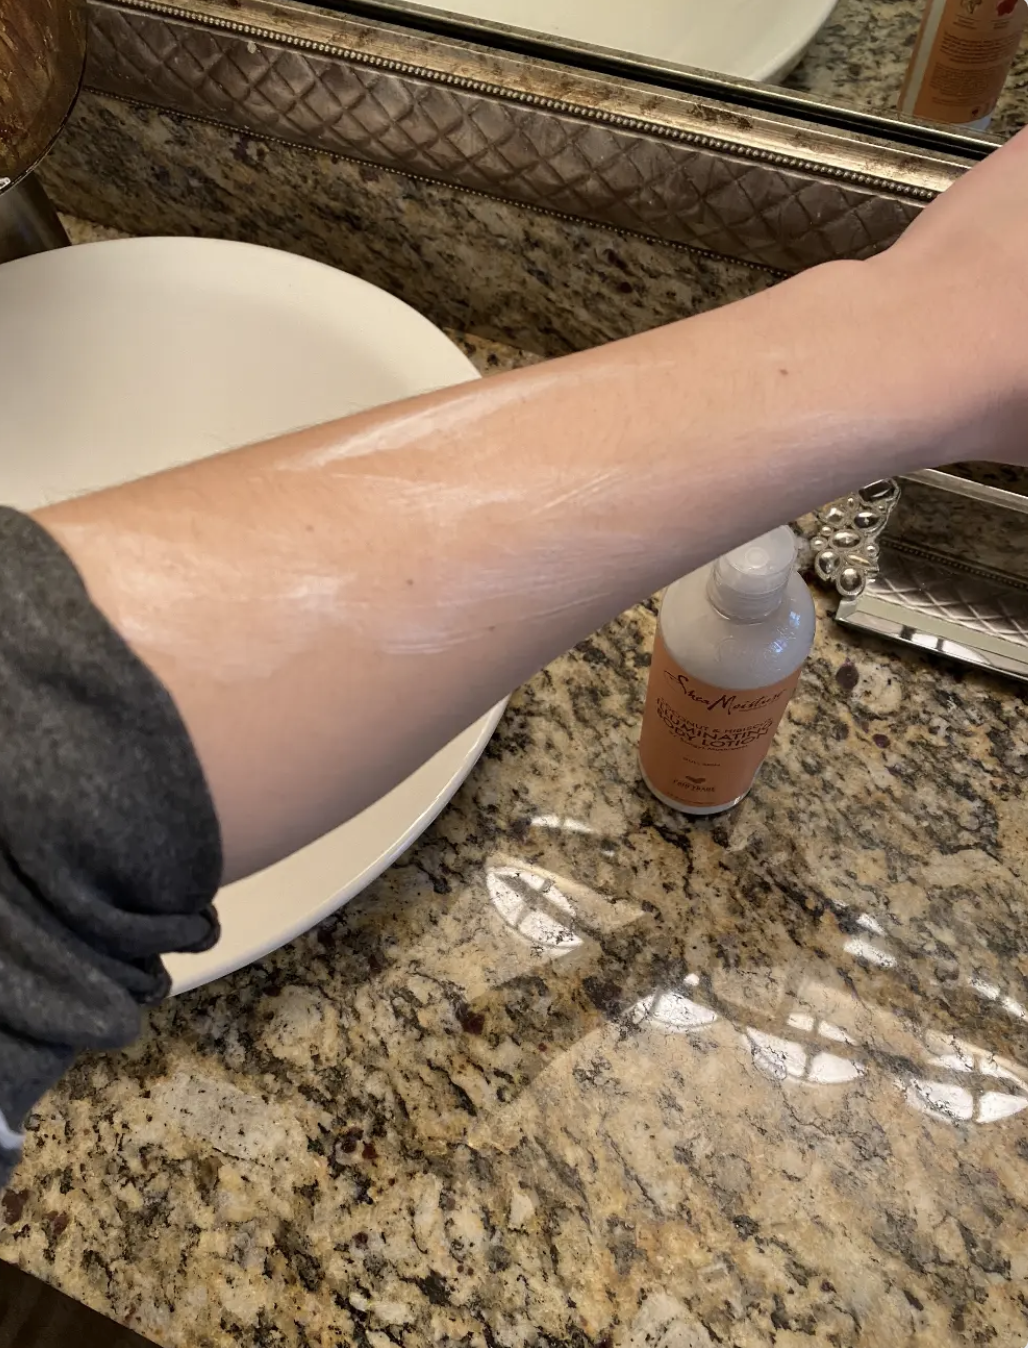 The author applying body lotion to her arm